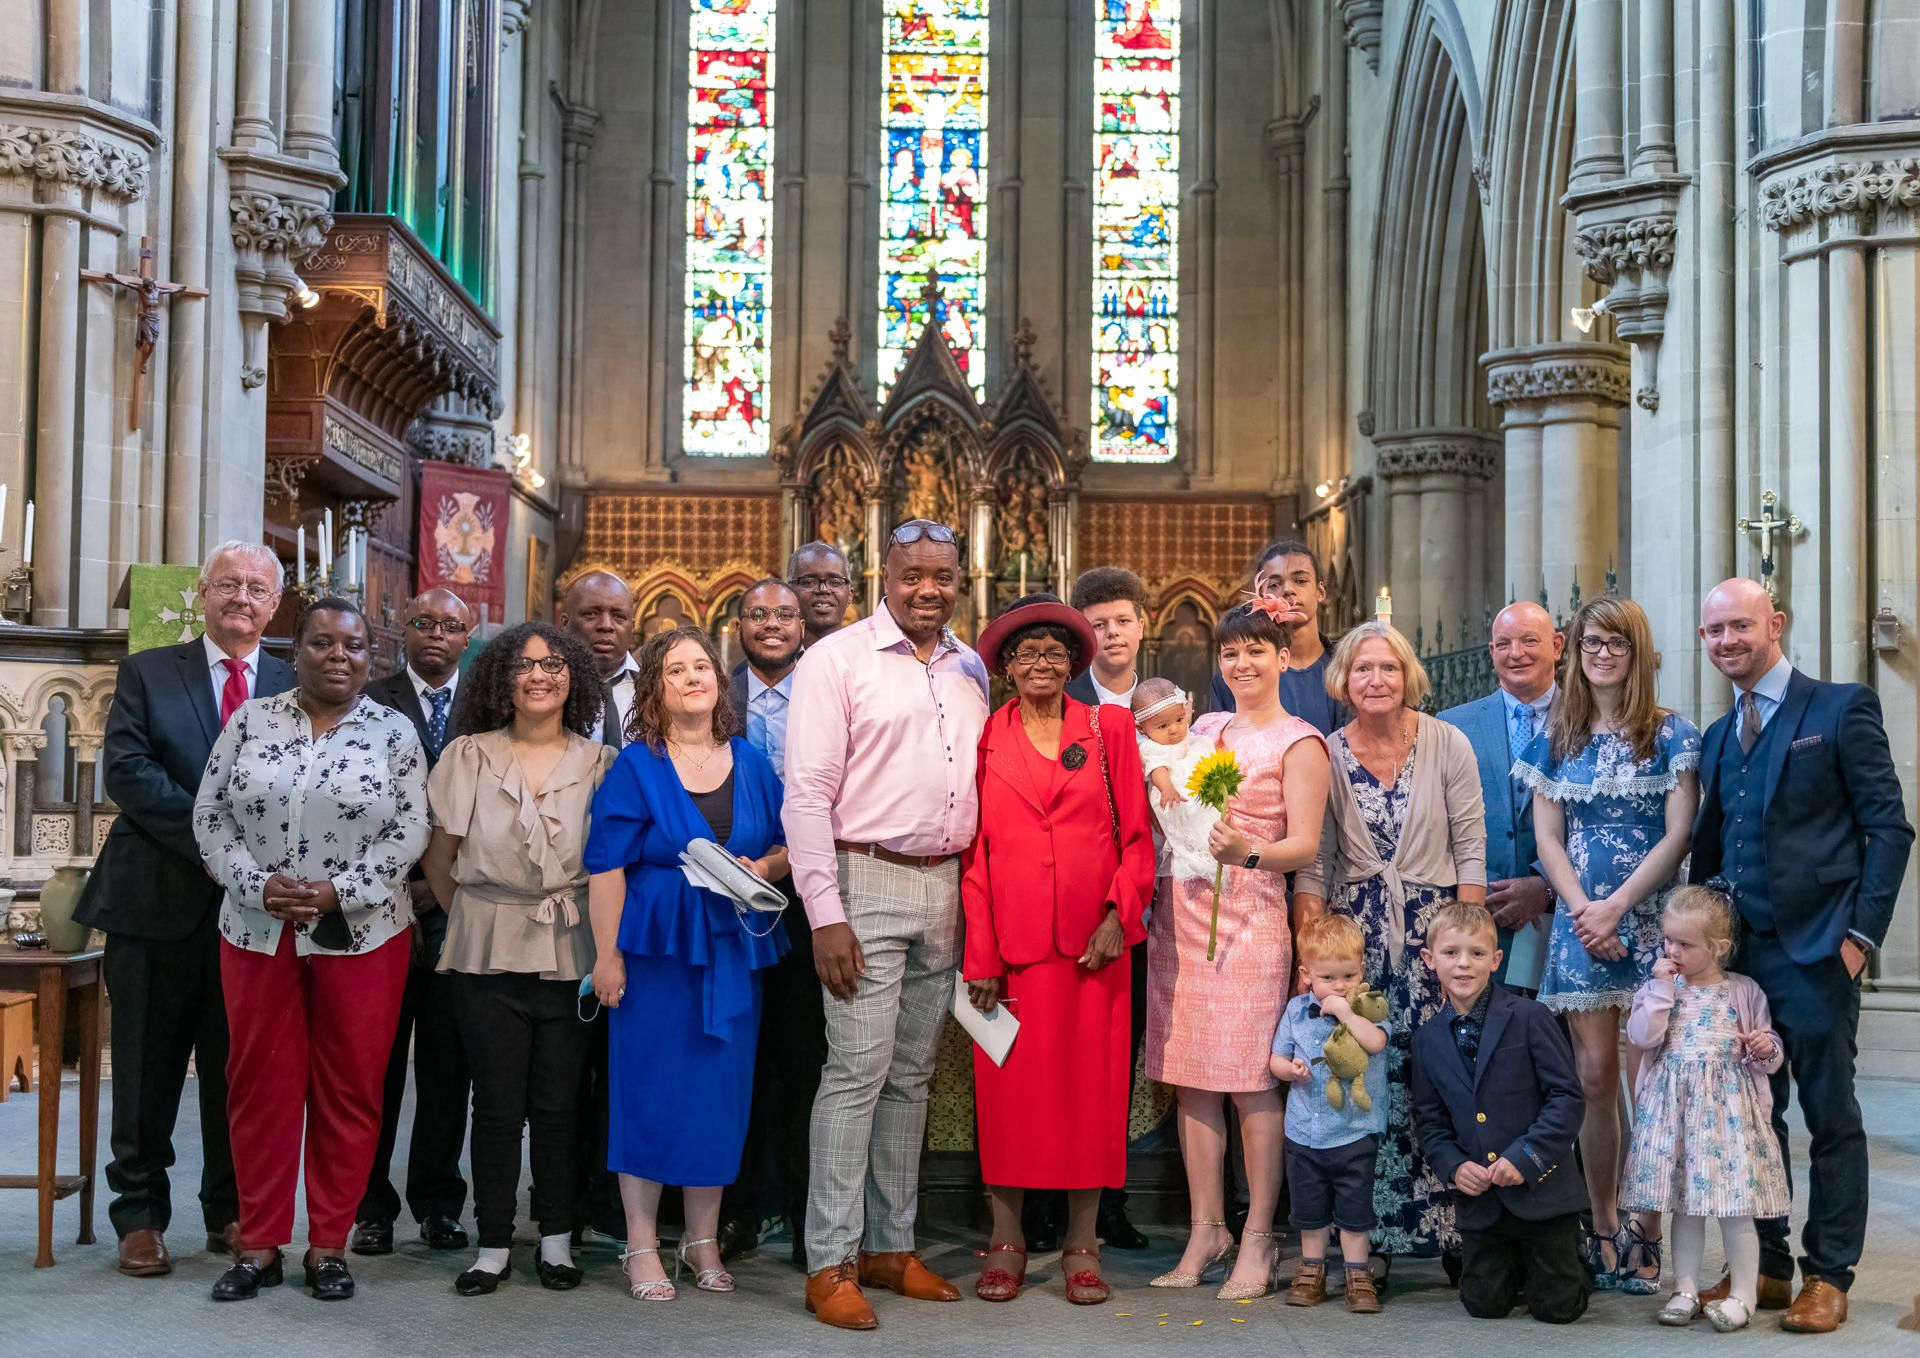 Family image after a baptism in a church